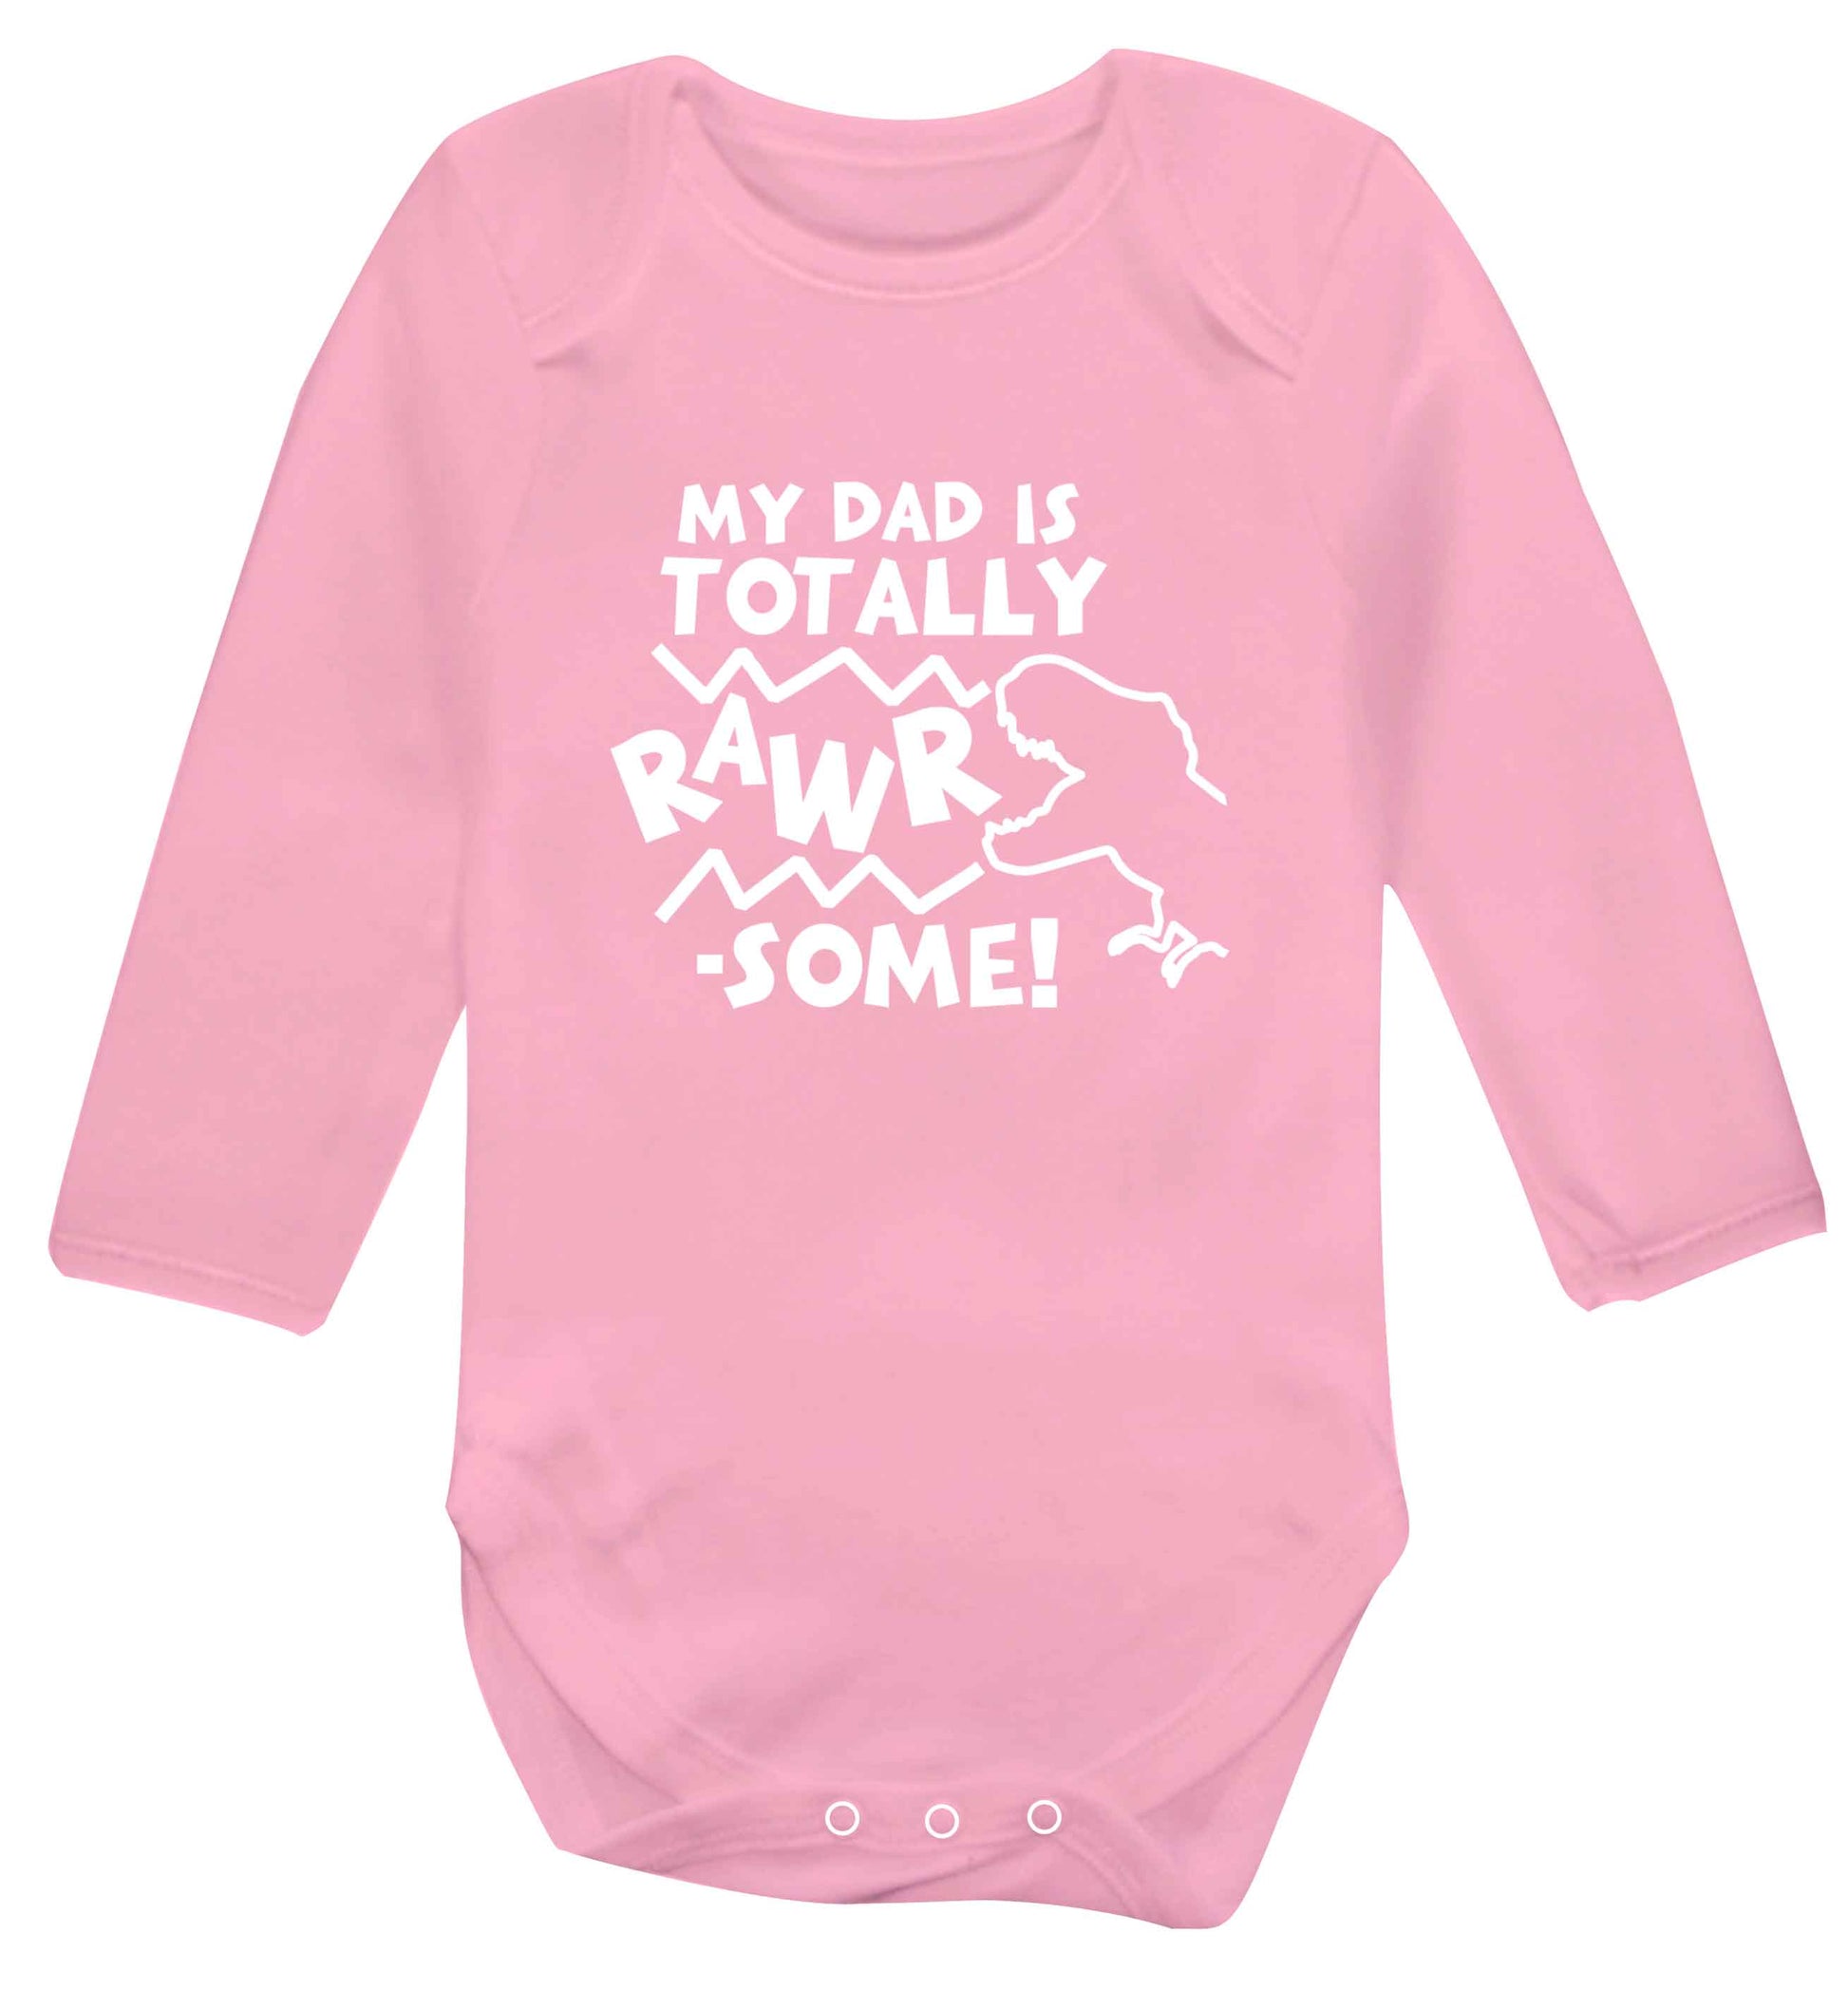 My dad is totally rawrsome baby vest long sleeved pale pink 6-12 months